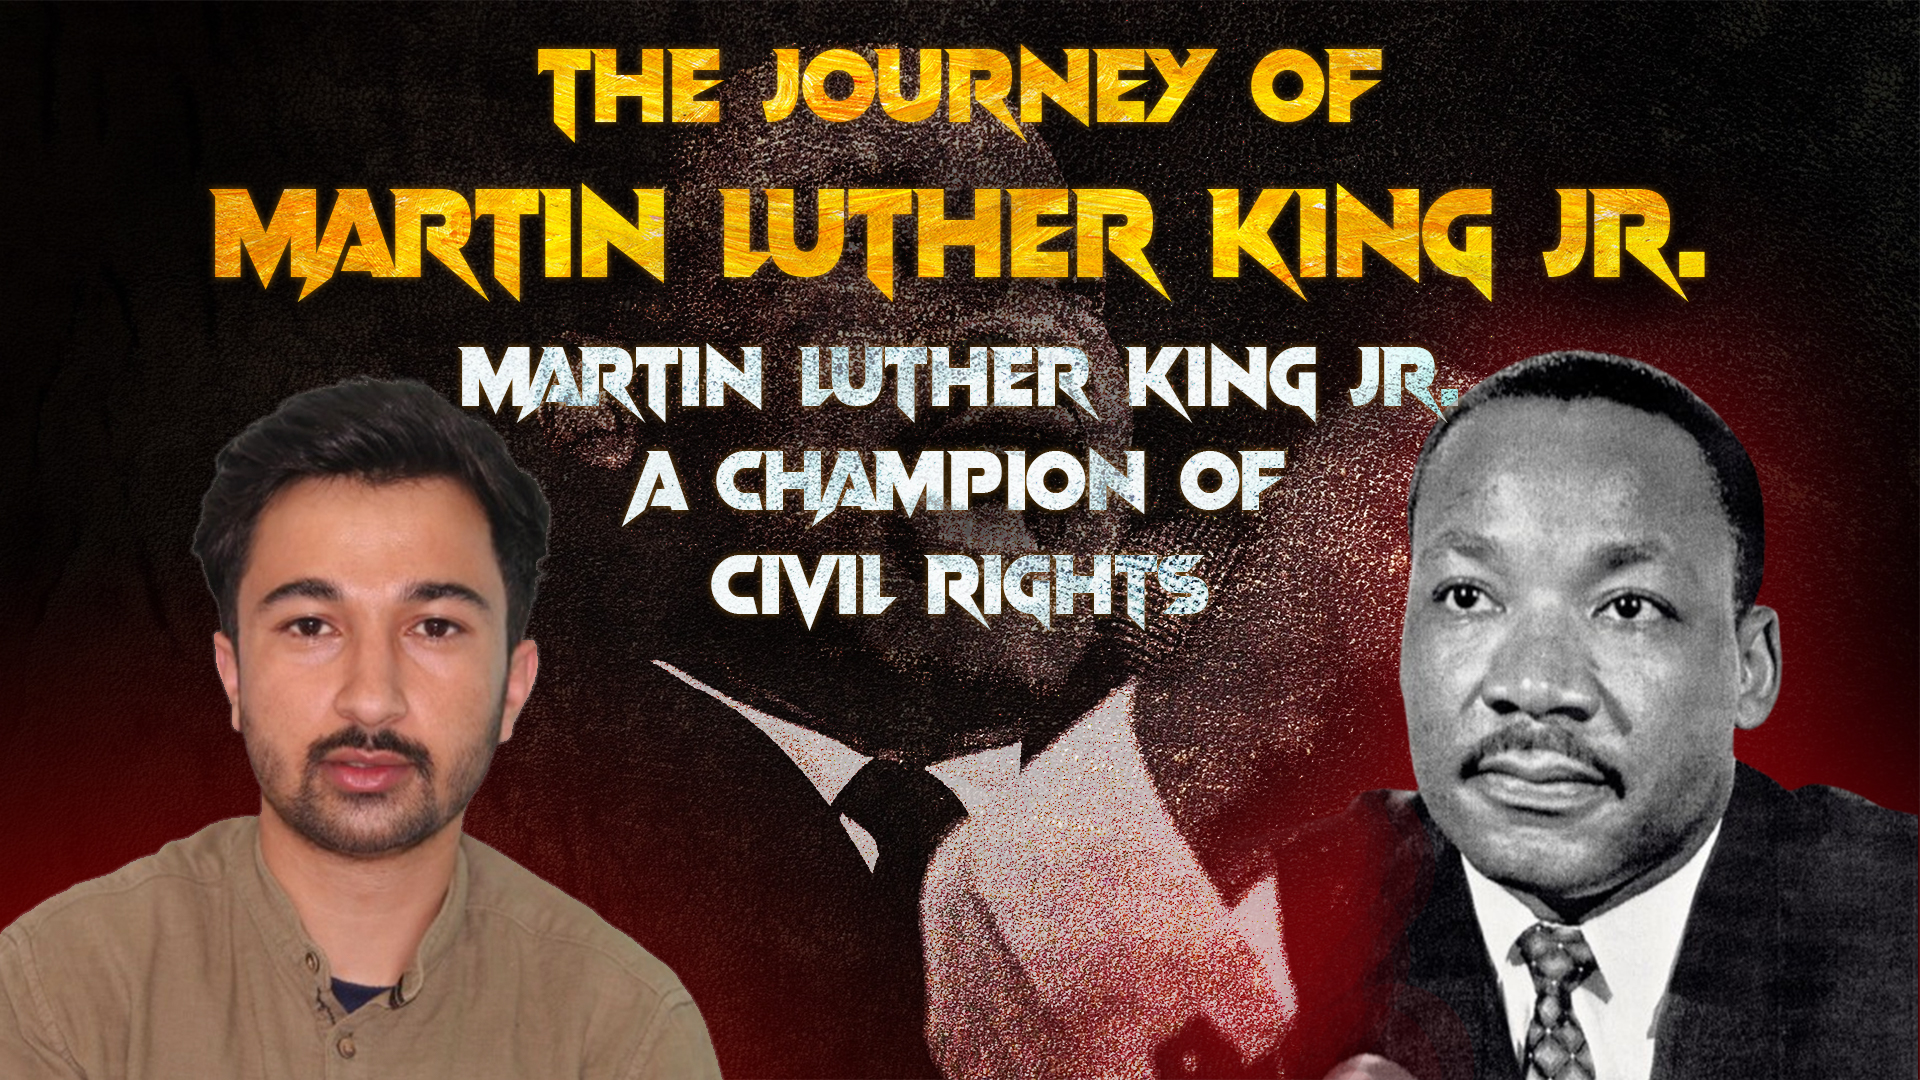 The Journey of Martin Luther King Jr.